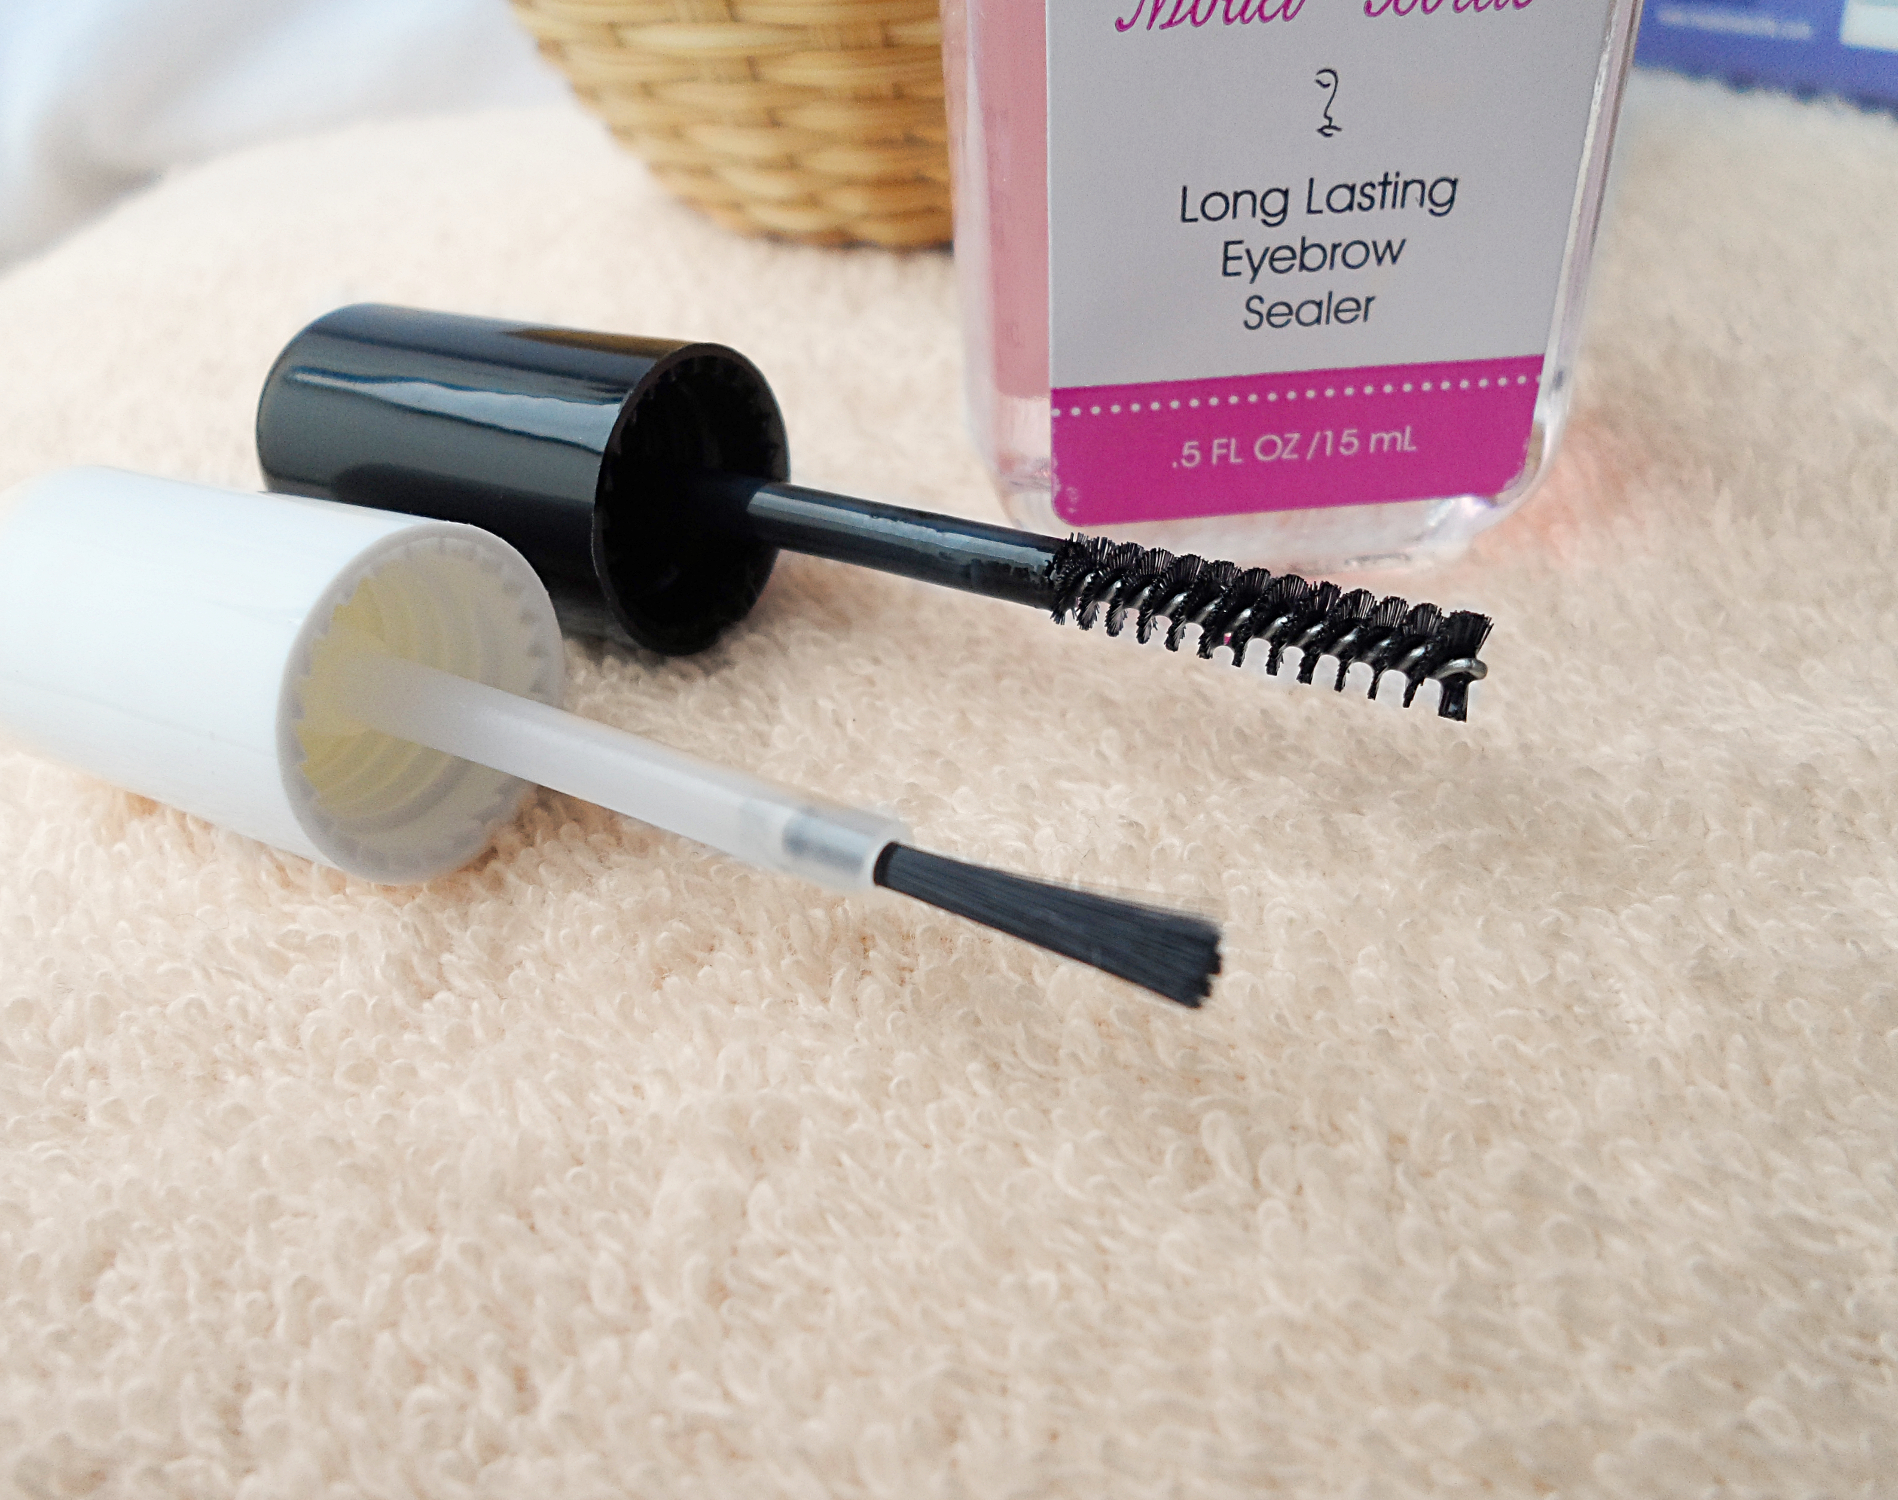 model in a bottle eyebrow product review and before after pictures by blogger